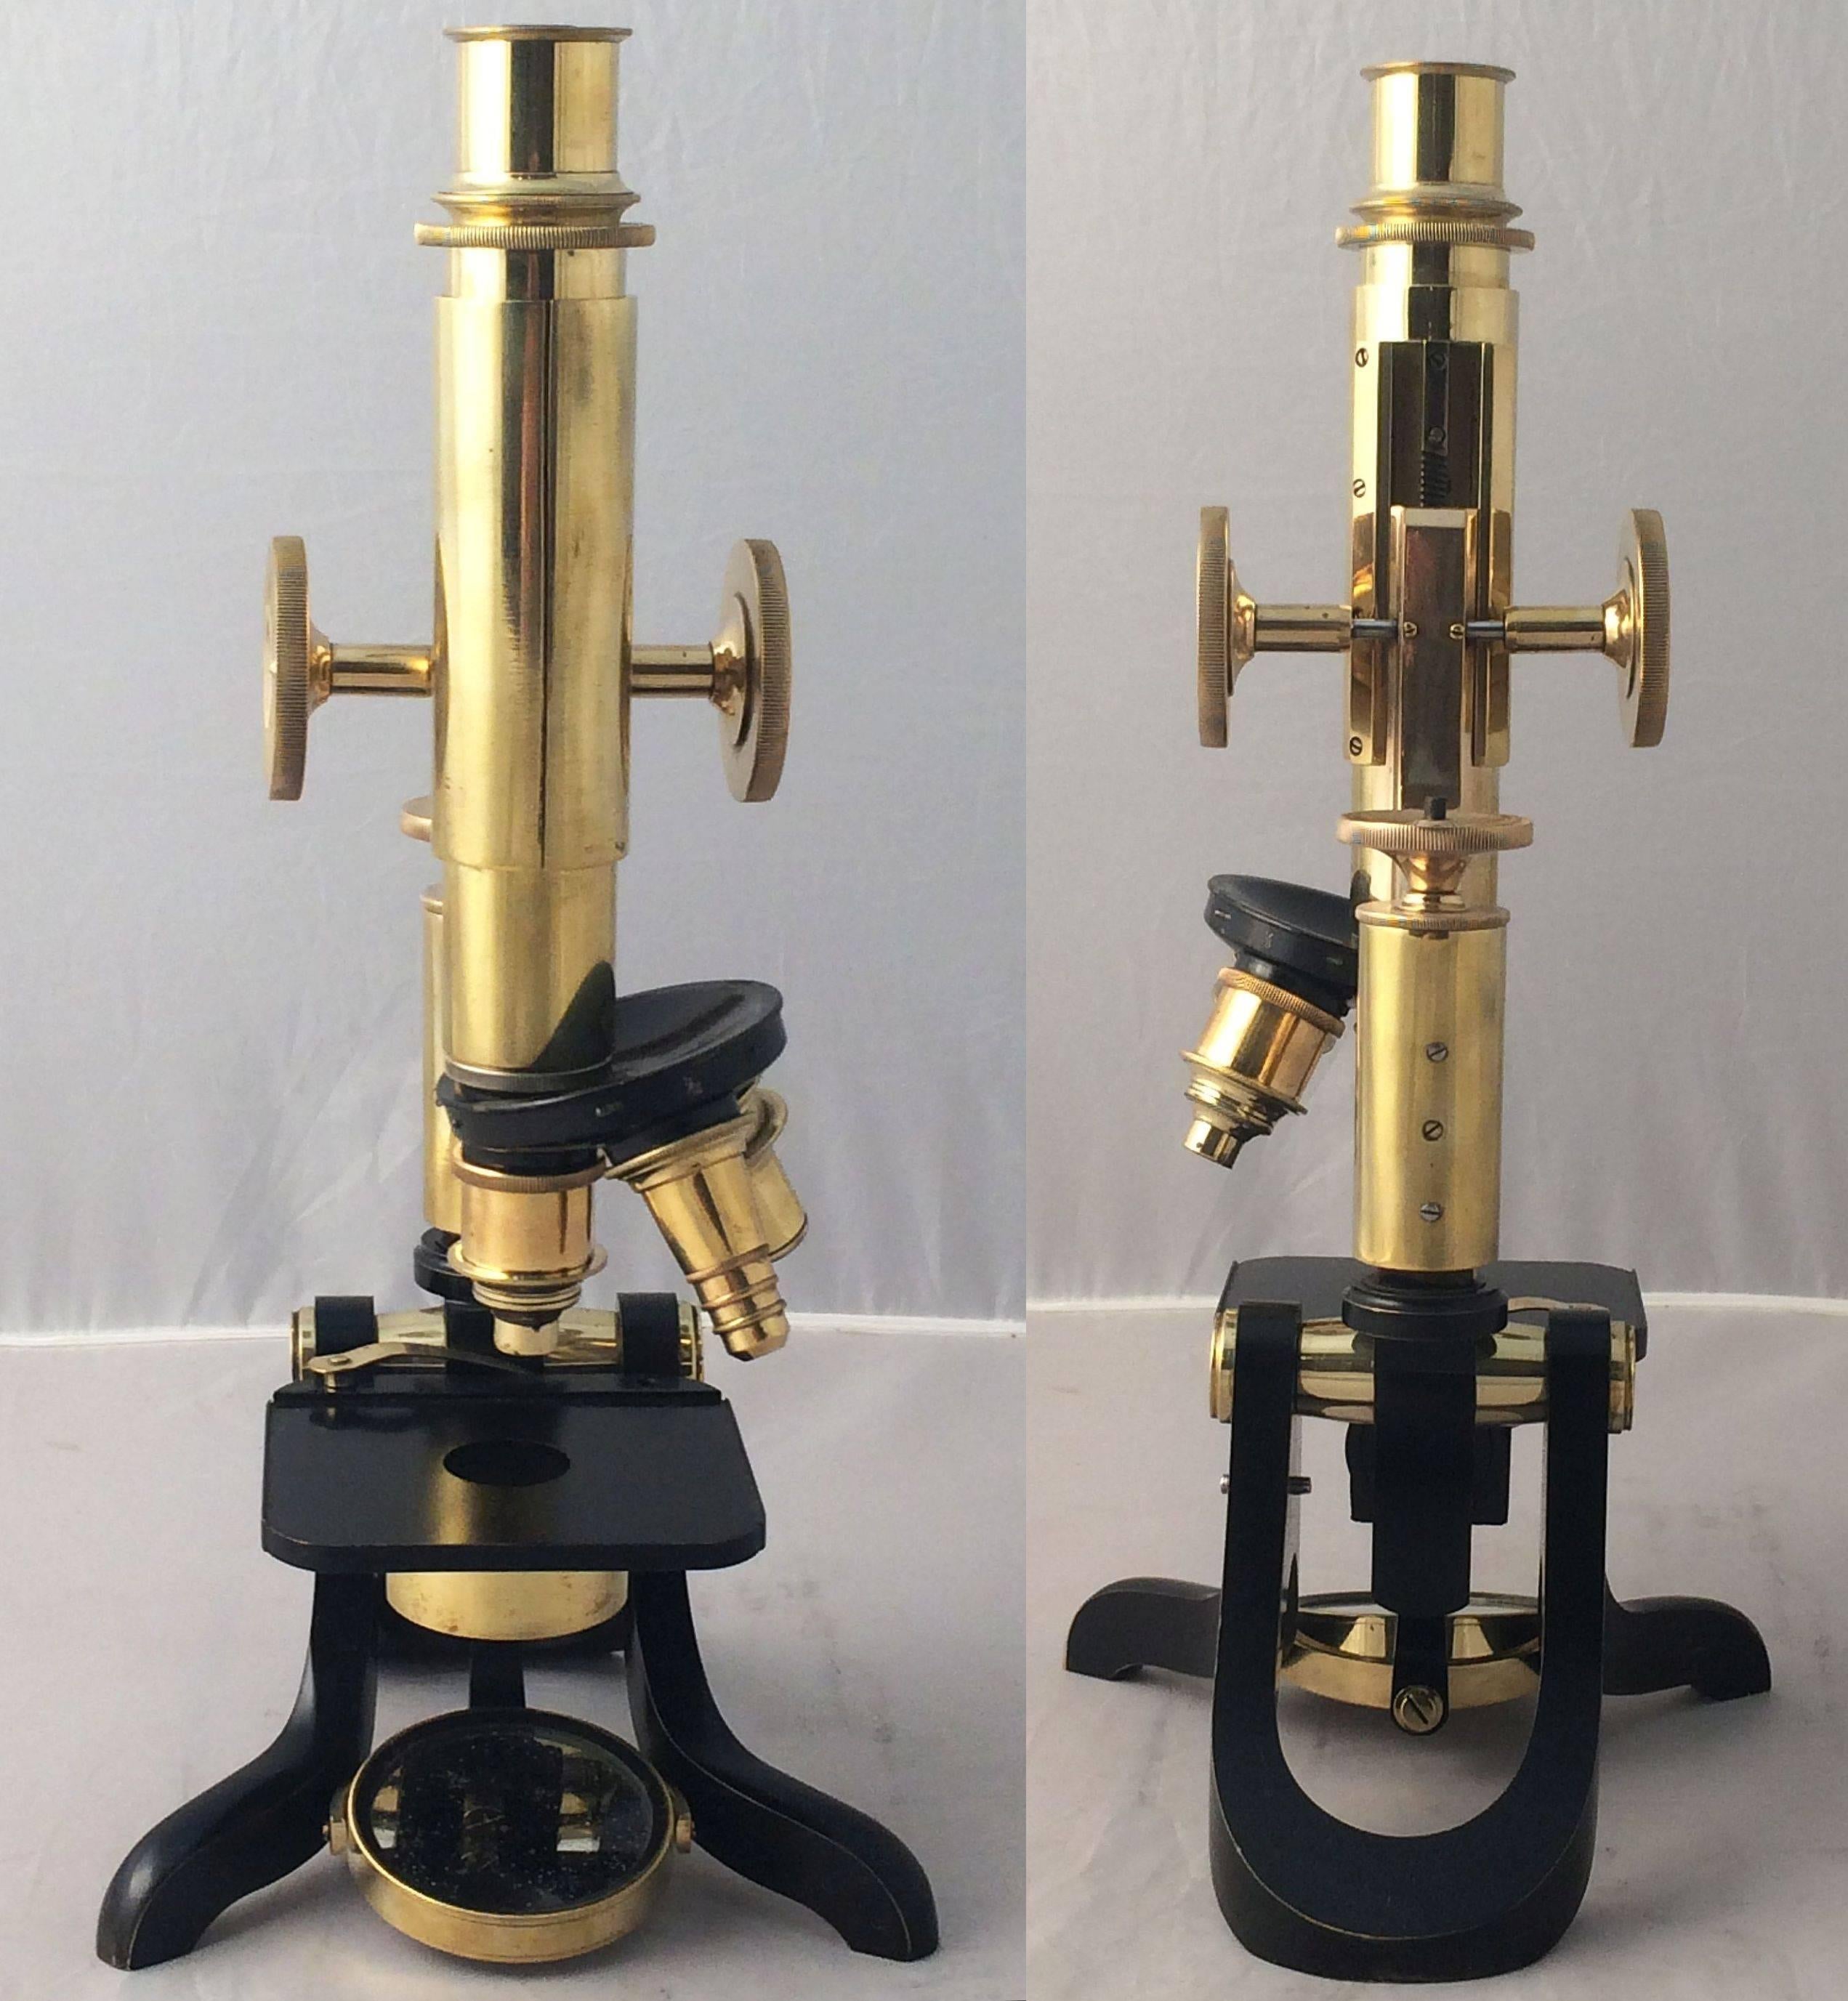 English Compound Microscope with Box and Key by Henry Crouch of London, No.4016